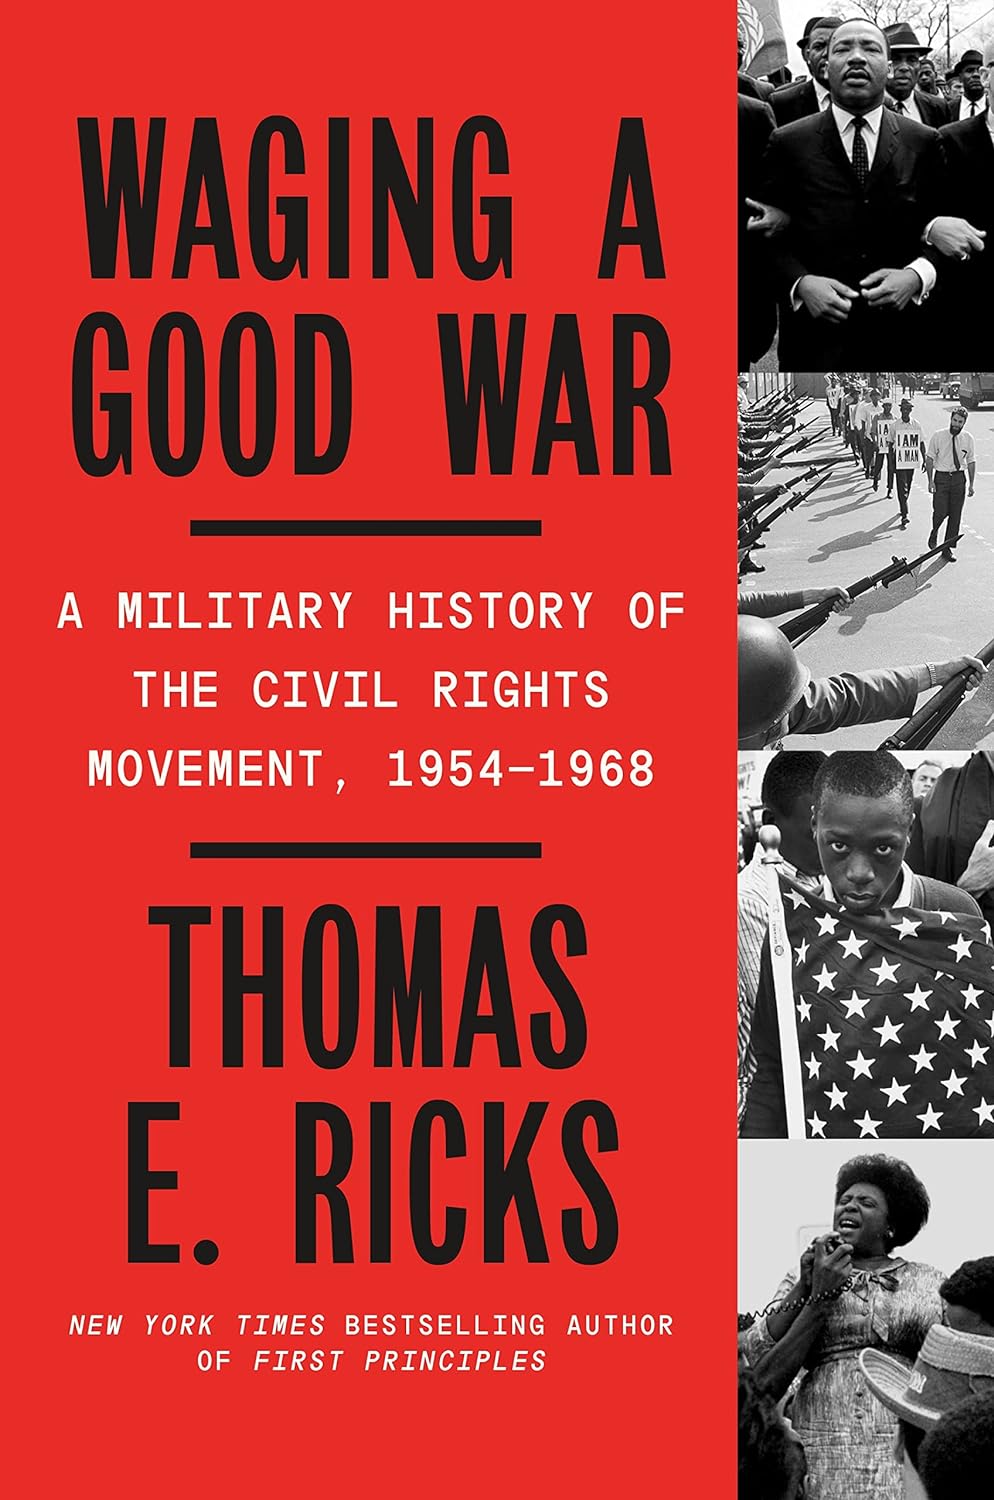 Waging a Good War A Military History of the Civil Rights Movement, 1954-1968 by Thomas E. Ricks